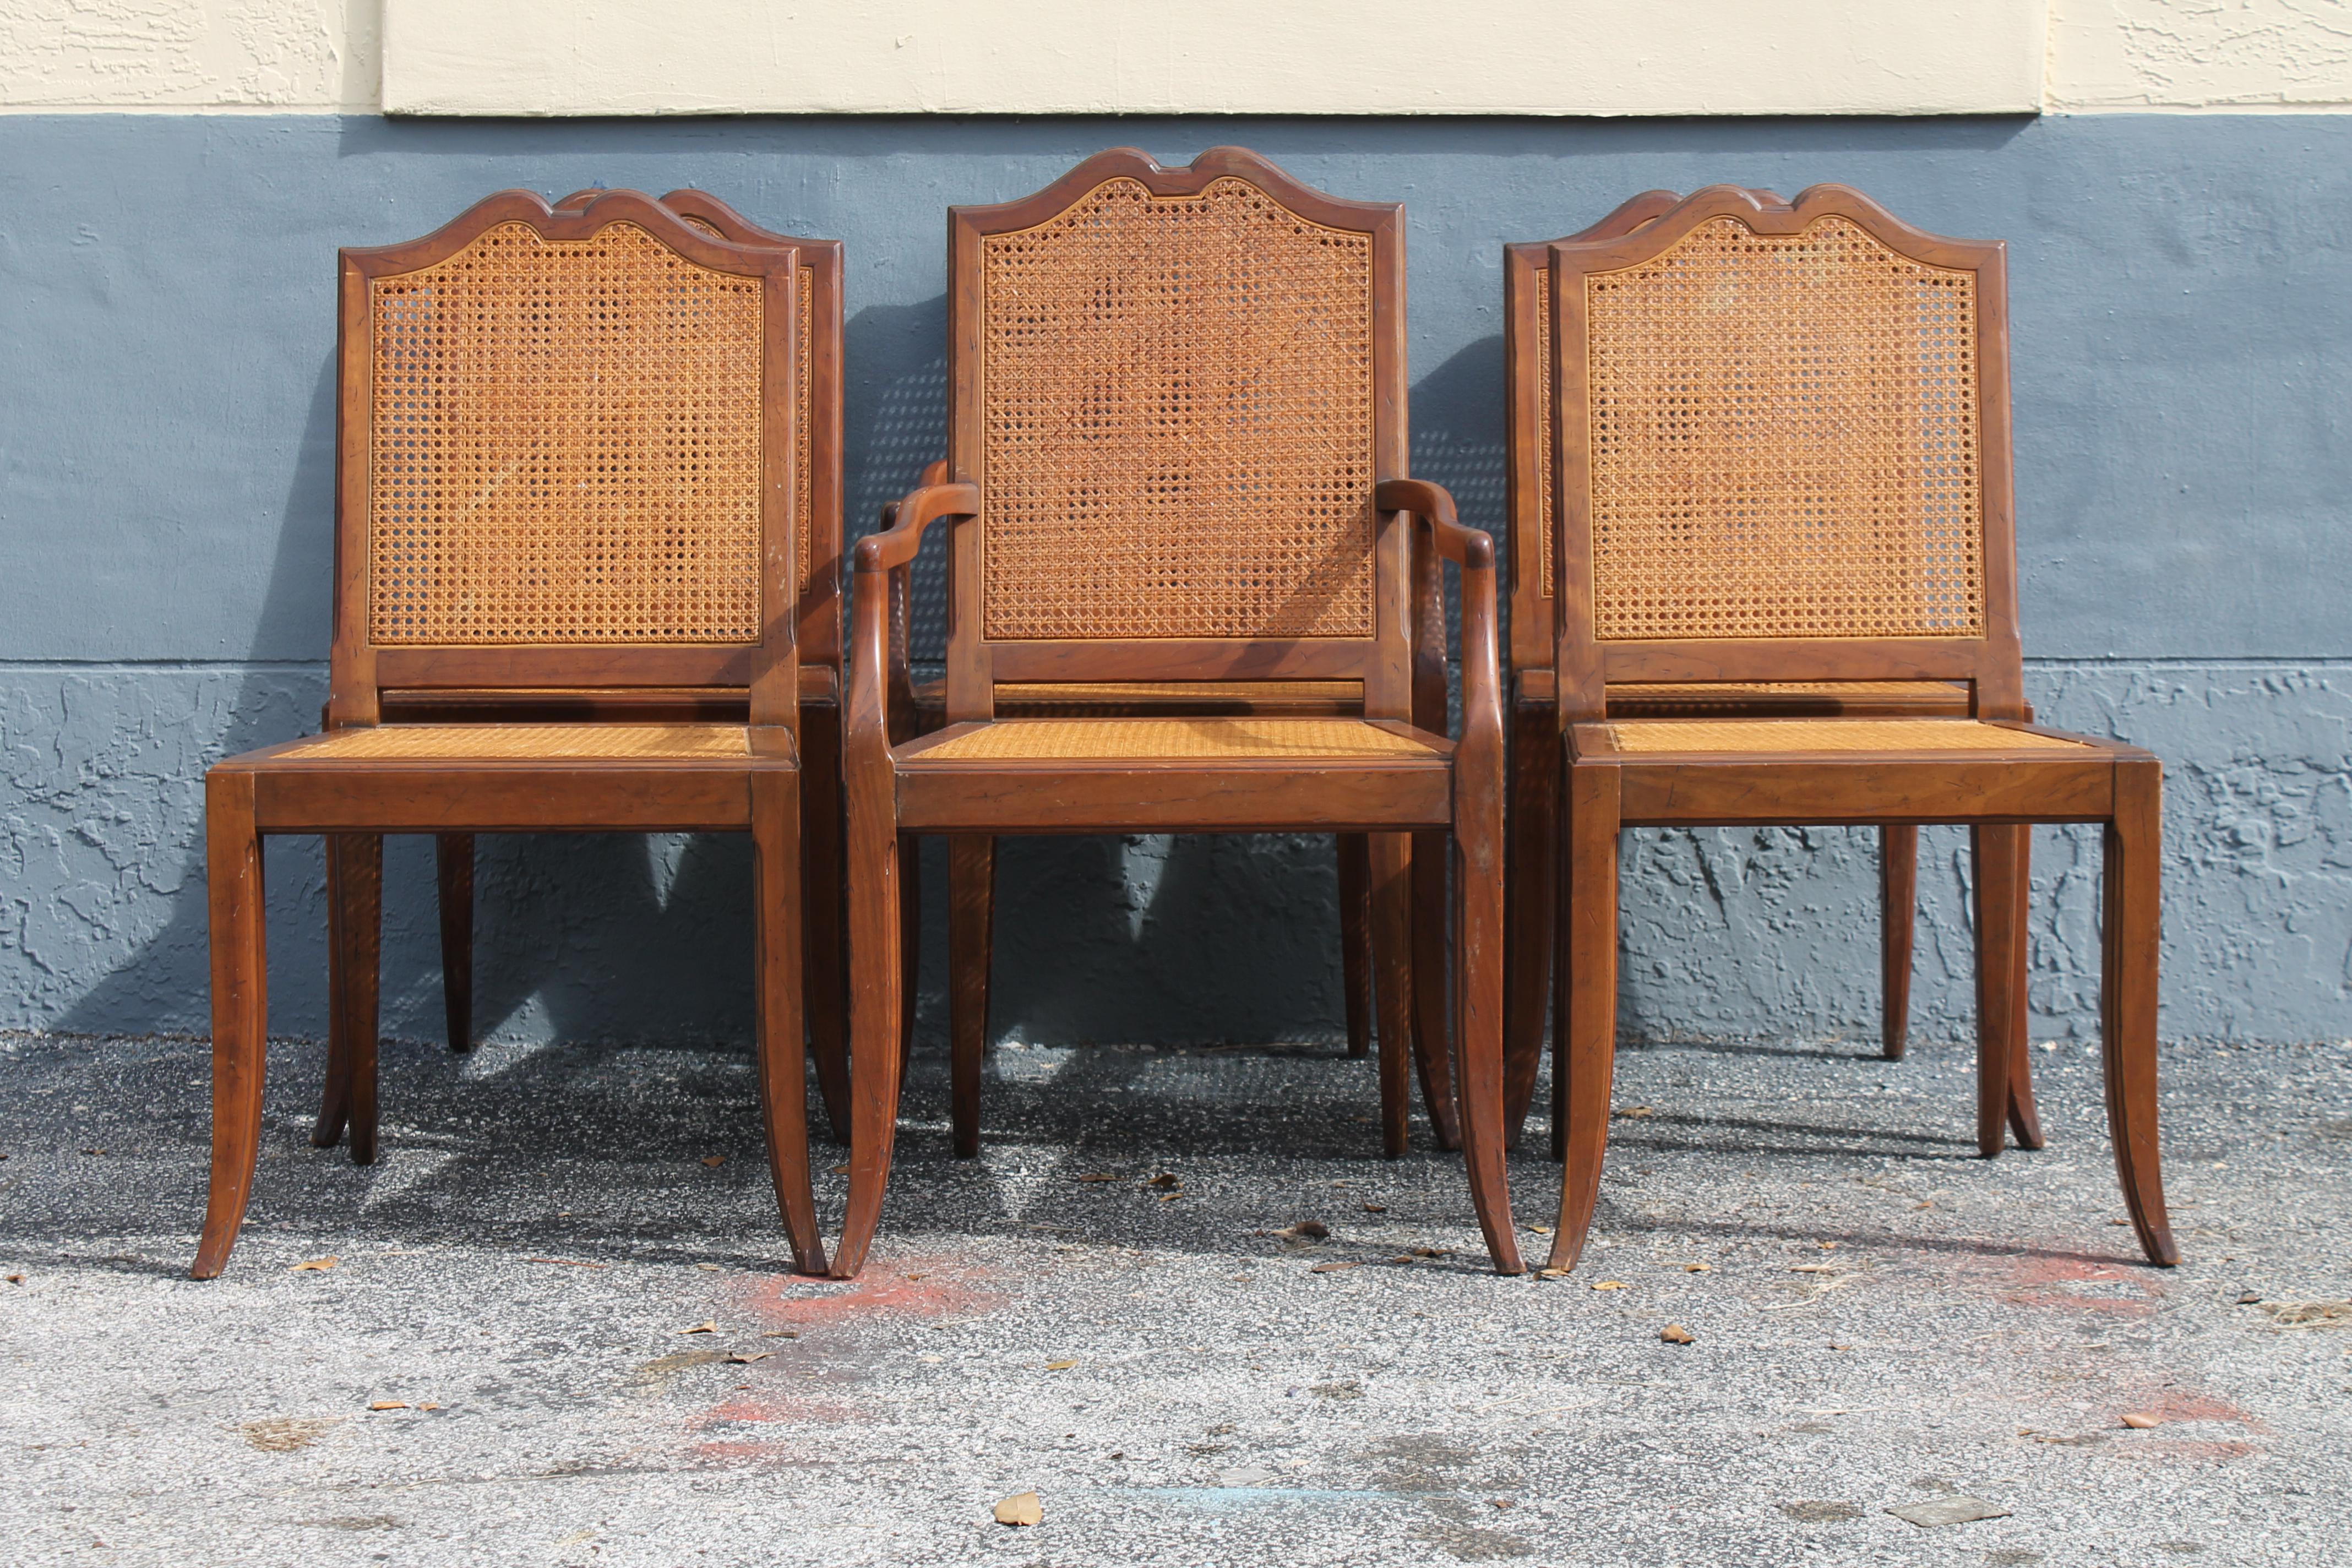 1970s Set of 6 Mid Century Modern Carved Wood and Caned Dining Chairs. These are beautiful chairs and the caning is intact. Walnut wood.